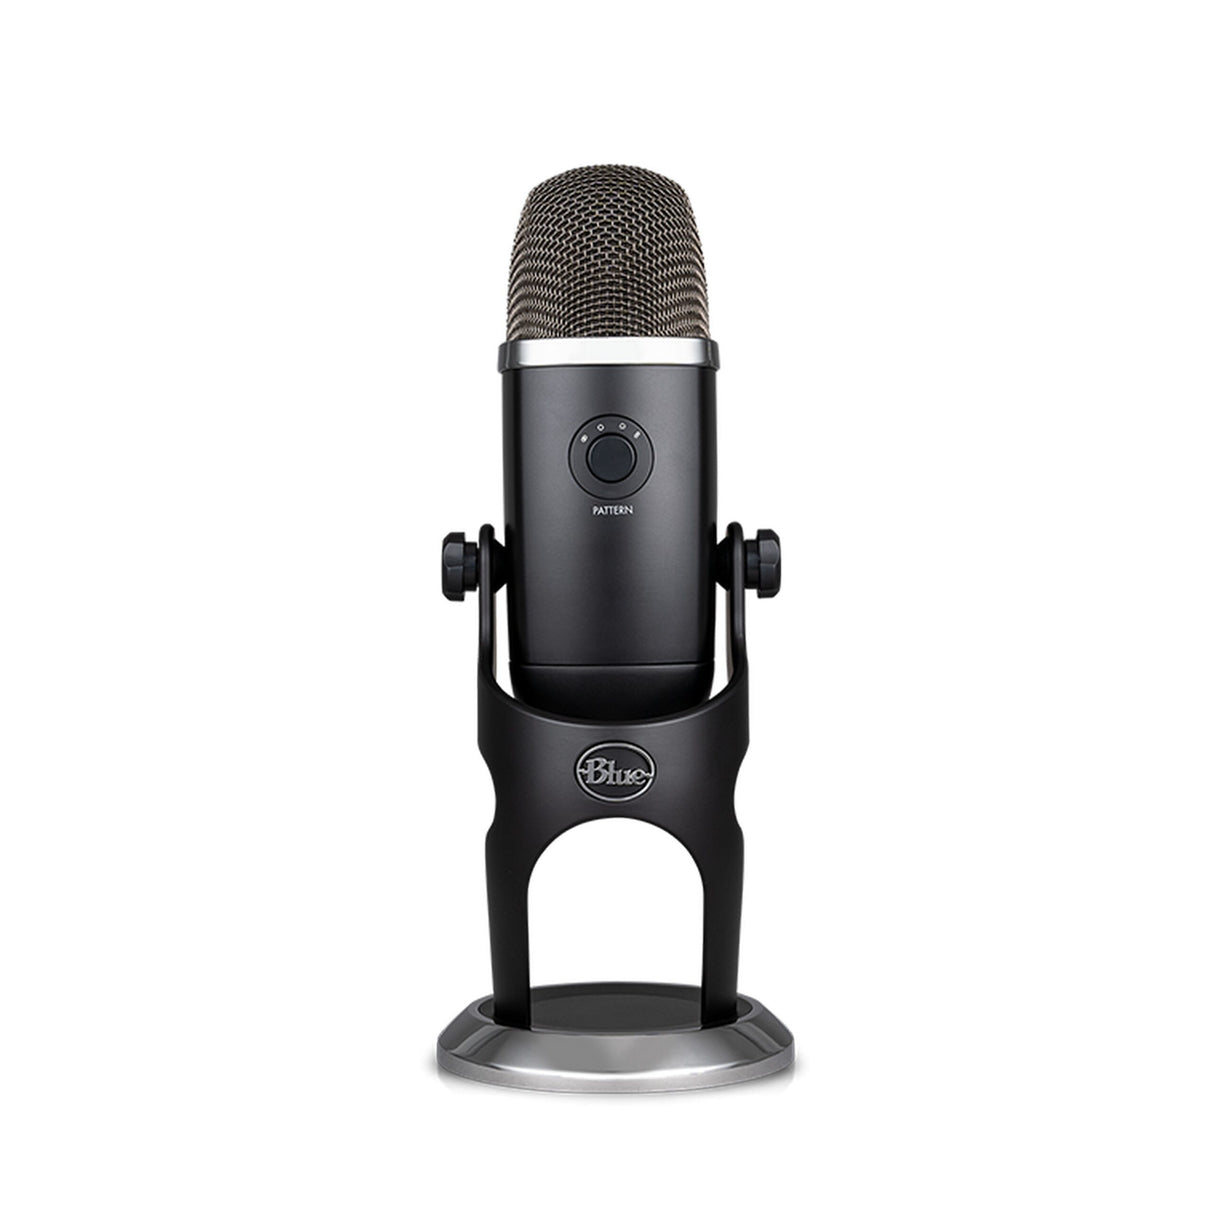 Blue Microphones Yeti X Professional USB Microphone for Gaming, Streaming and Podcasting